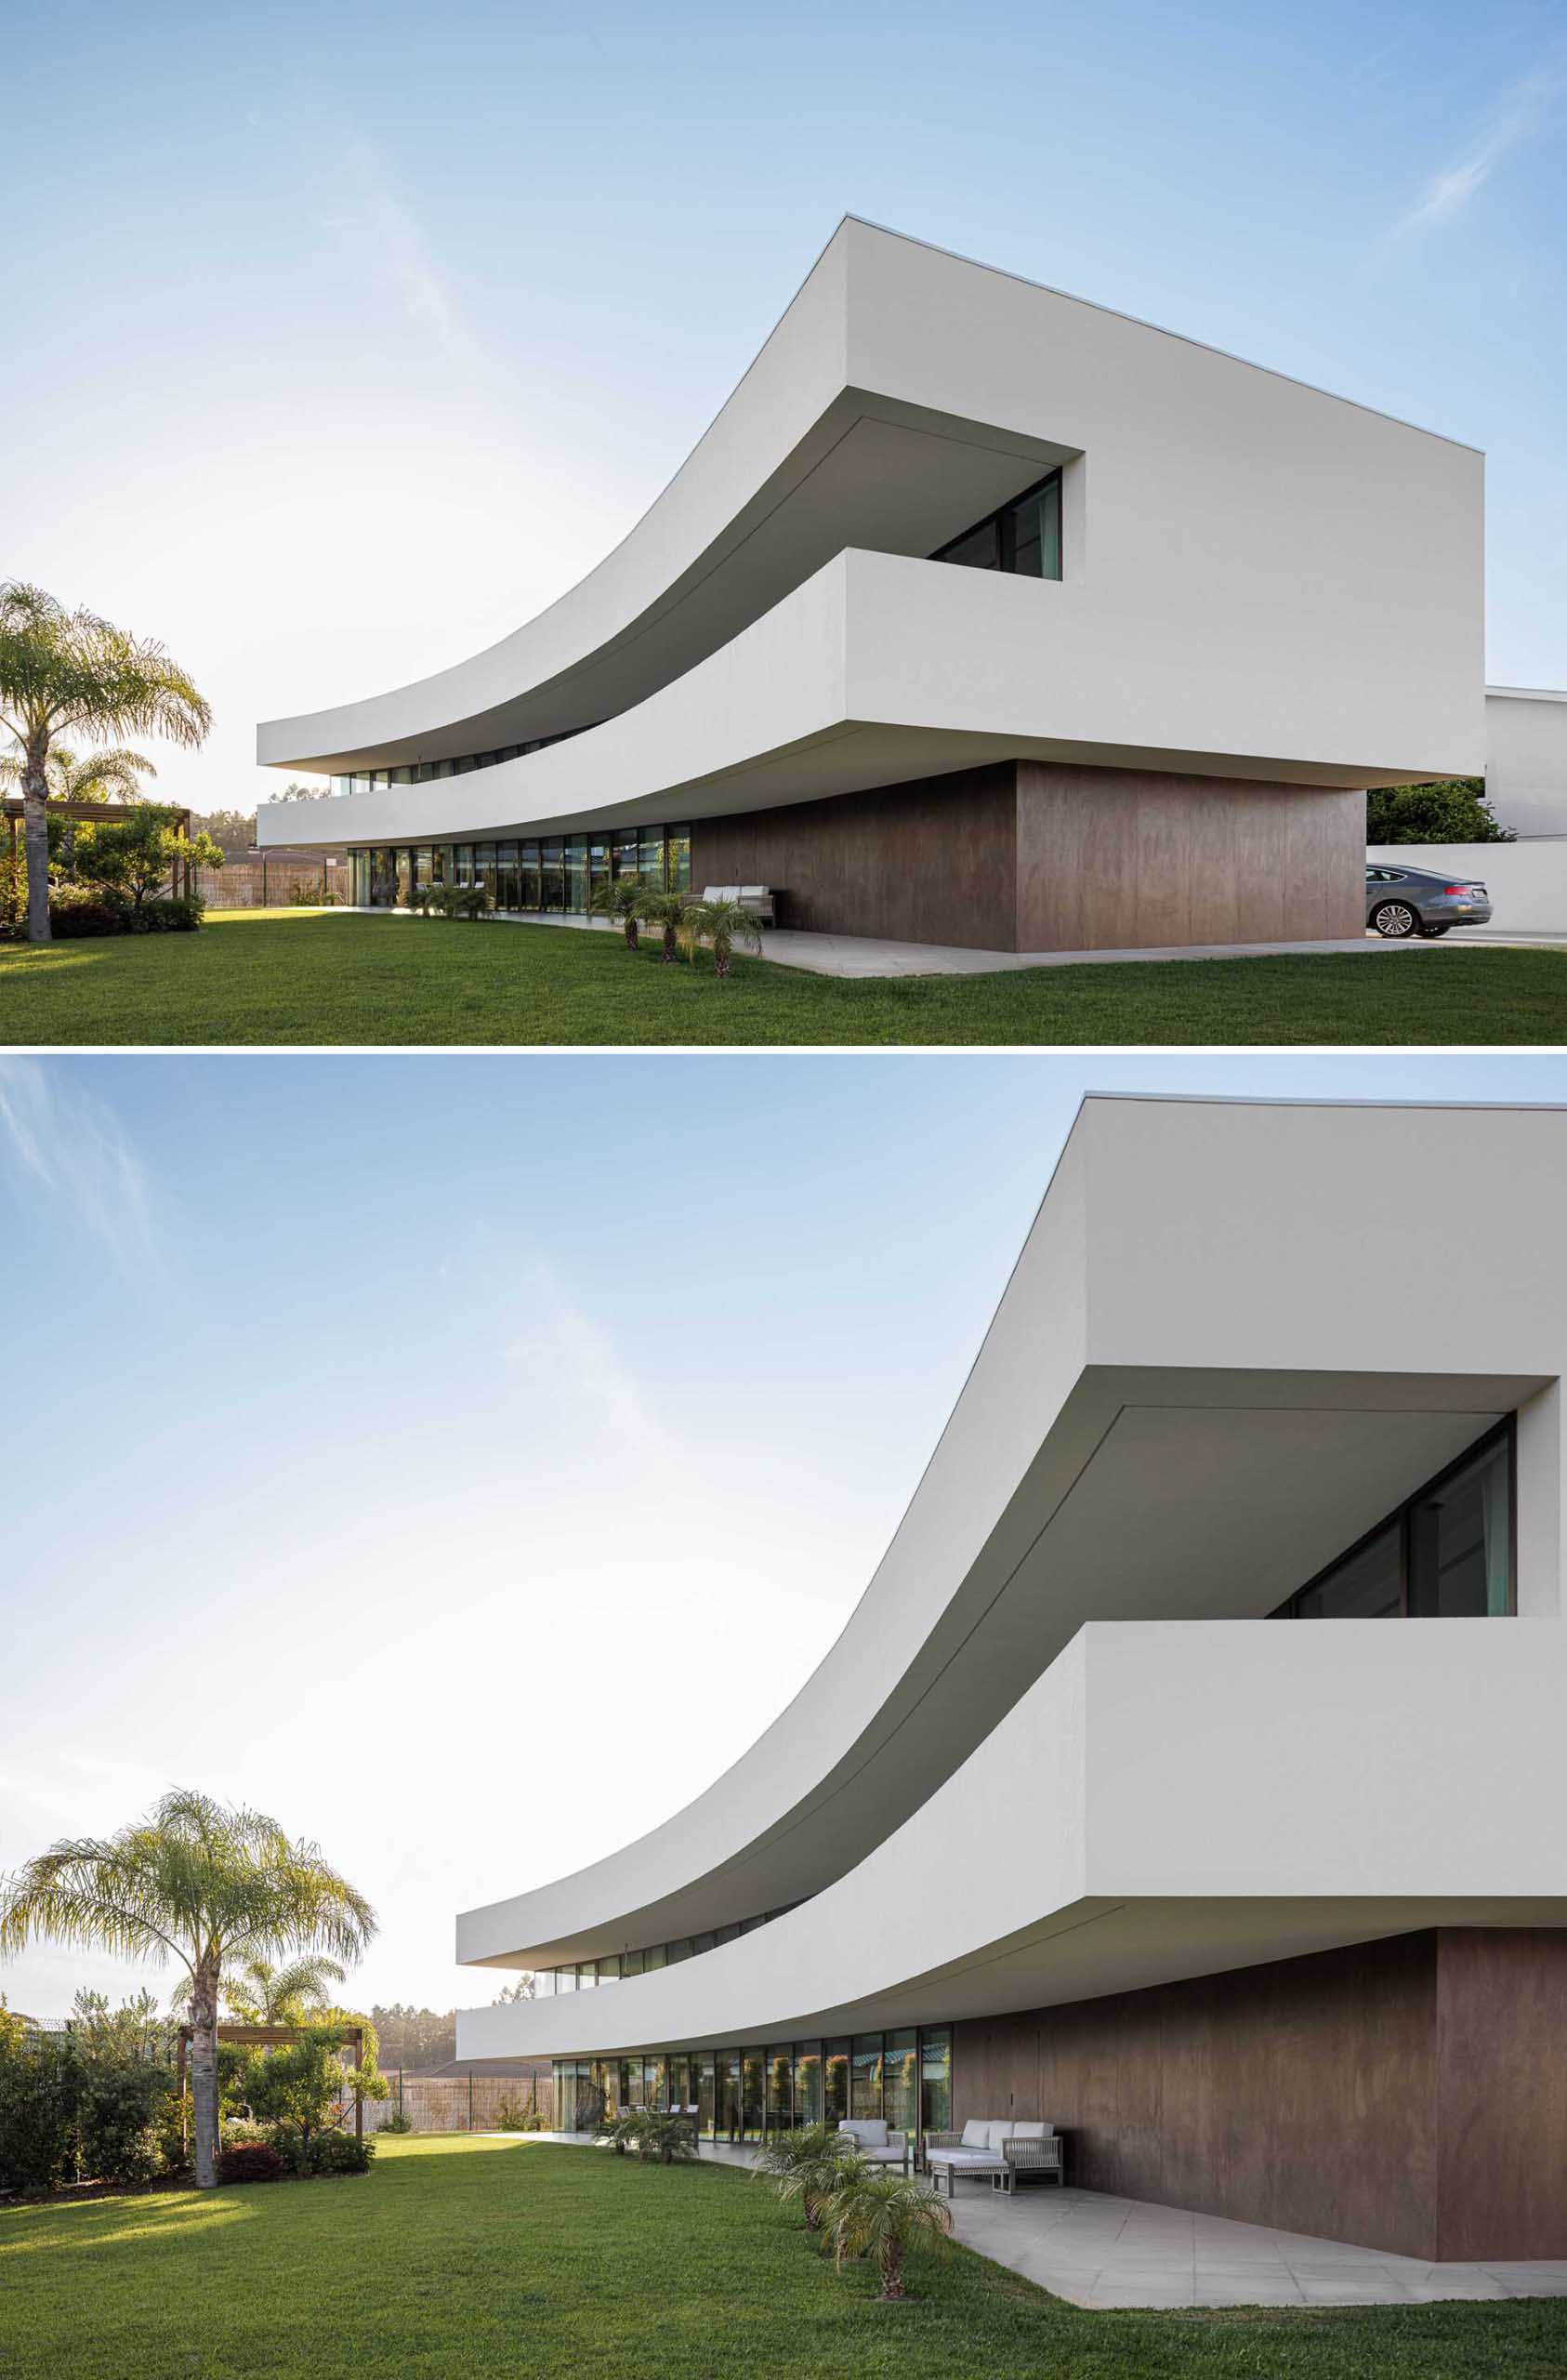 Through its shape and arrangement, this curved home protects itself from the busy road, while also opening up the interior to the outdoor spaces, like the yard and balcony.